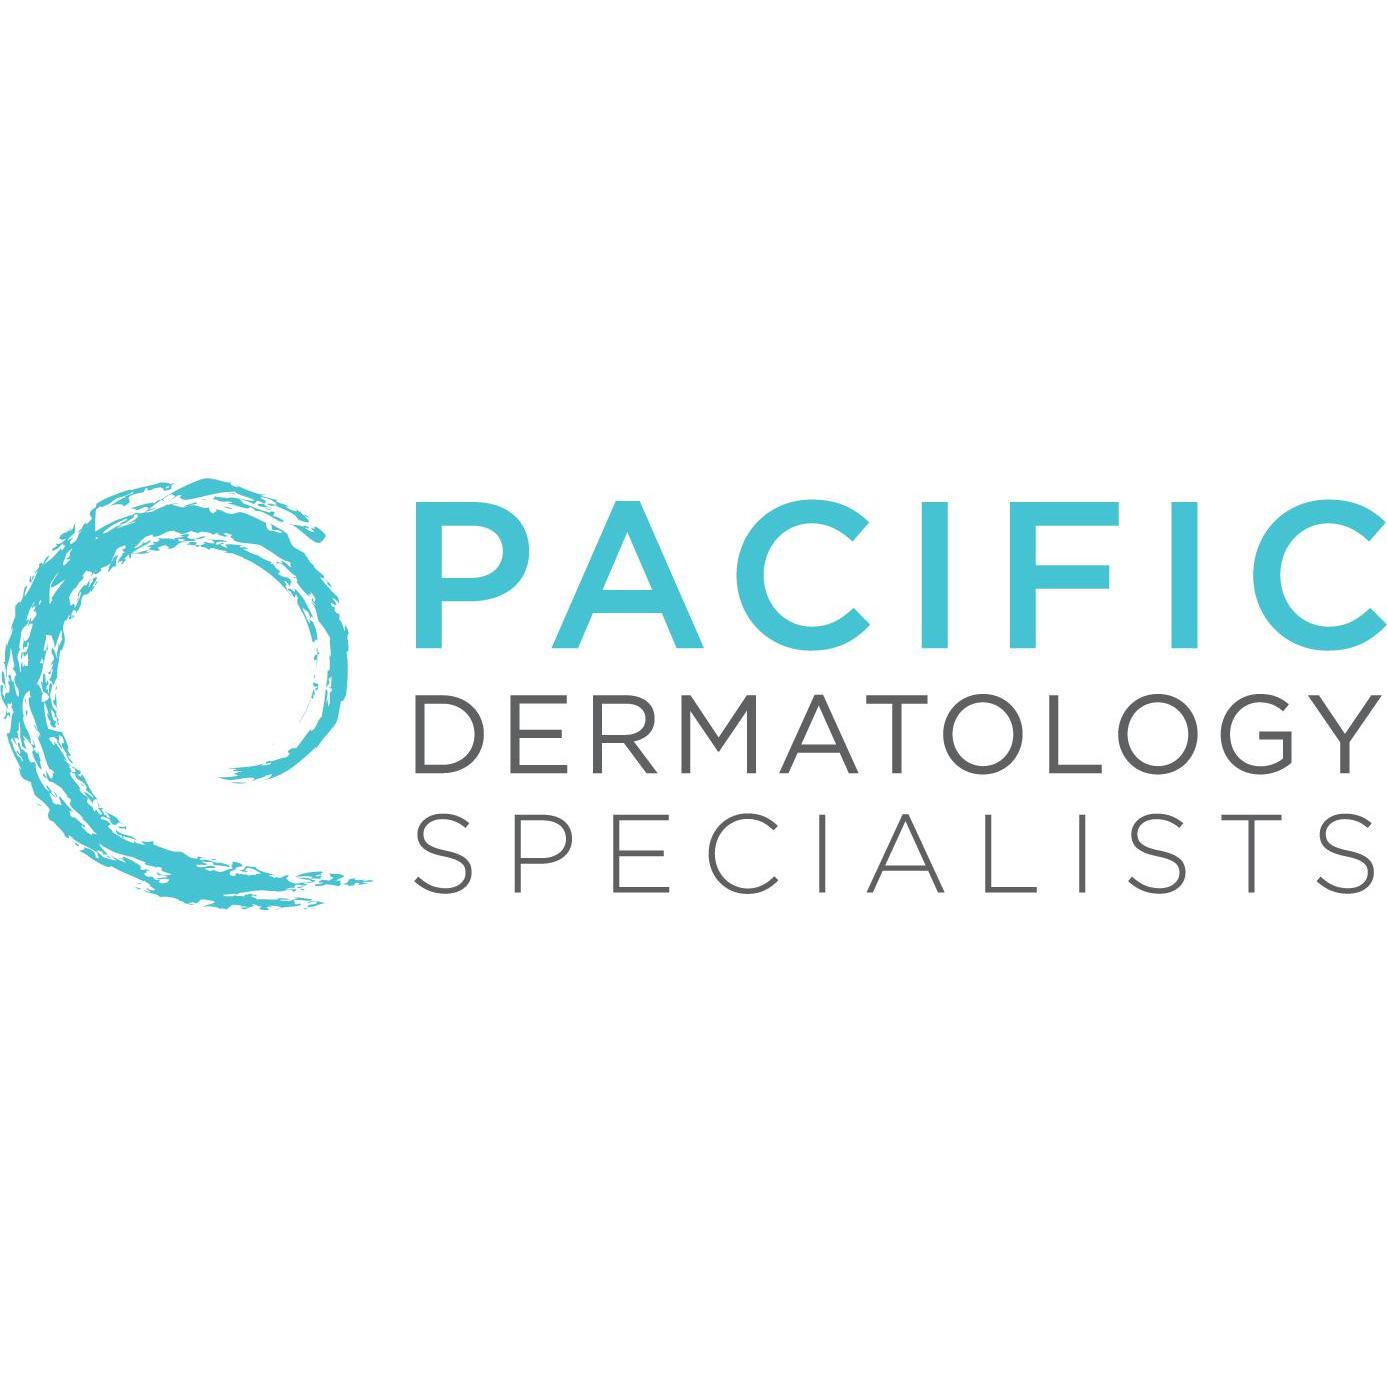 Pacific Dermatology Specialists - Torrance, CA 90505-4763 - (310)373-6952 | ShowMeLocal.com